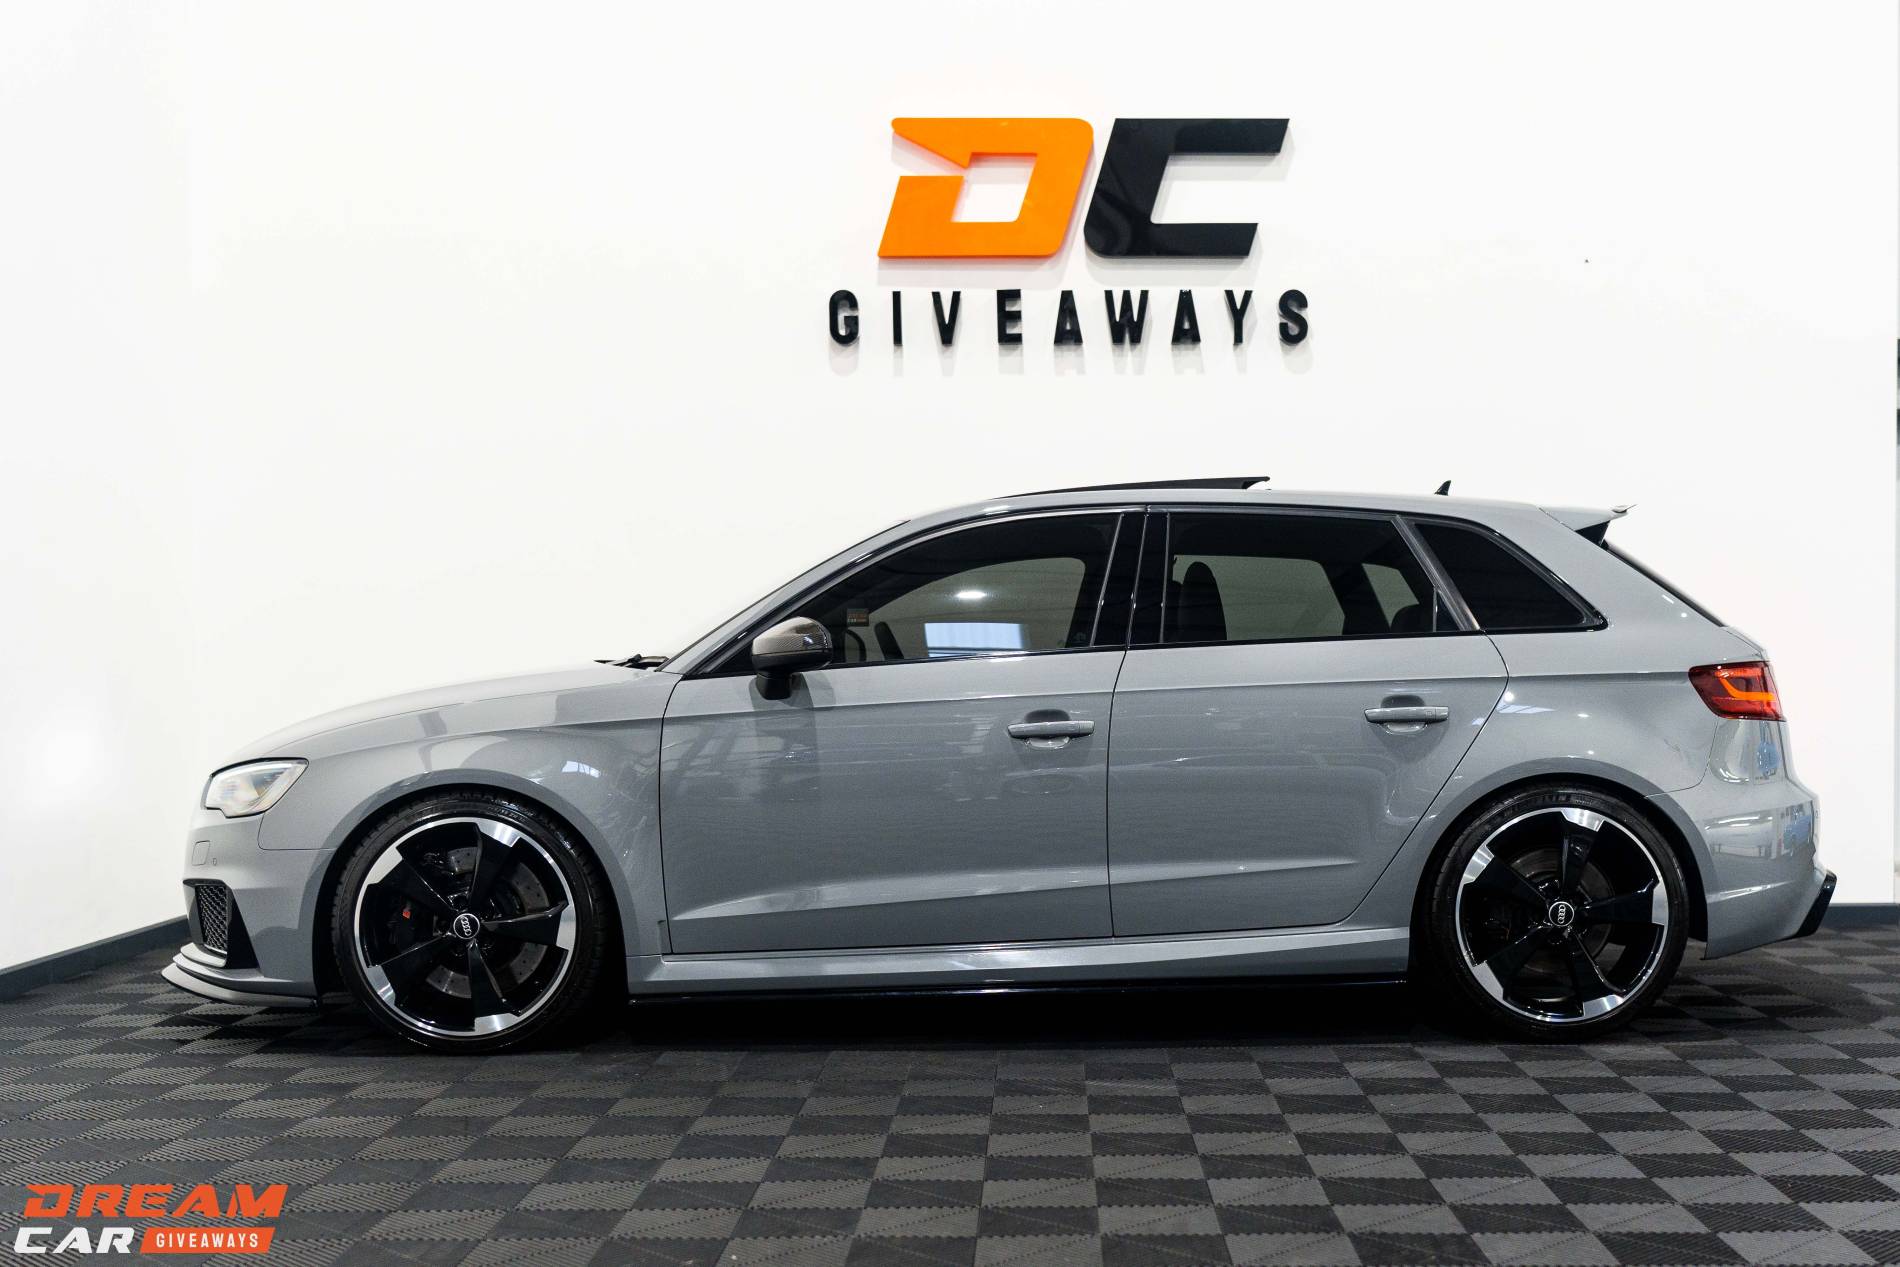 Win This Audi RS3 Sportback - Only 869 Entries